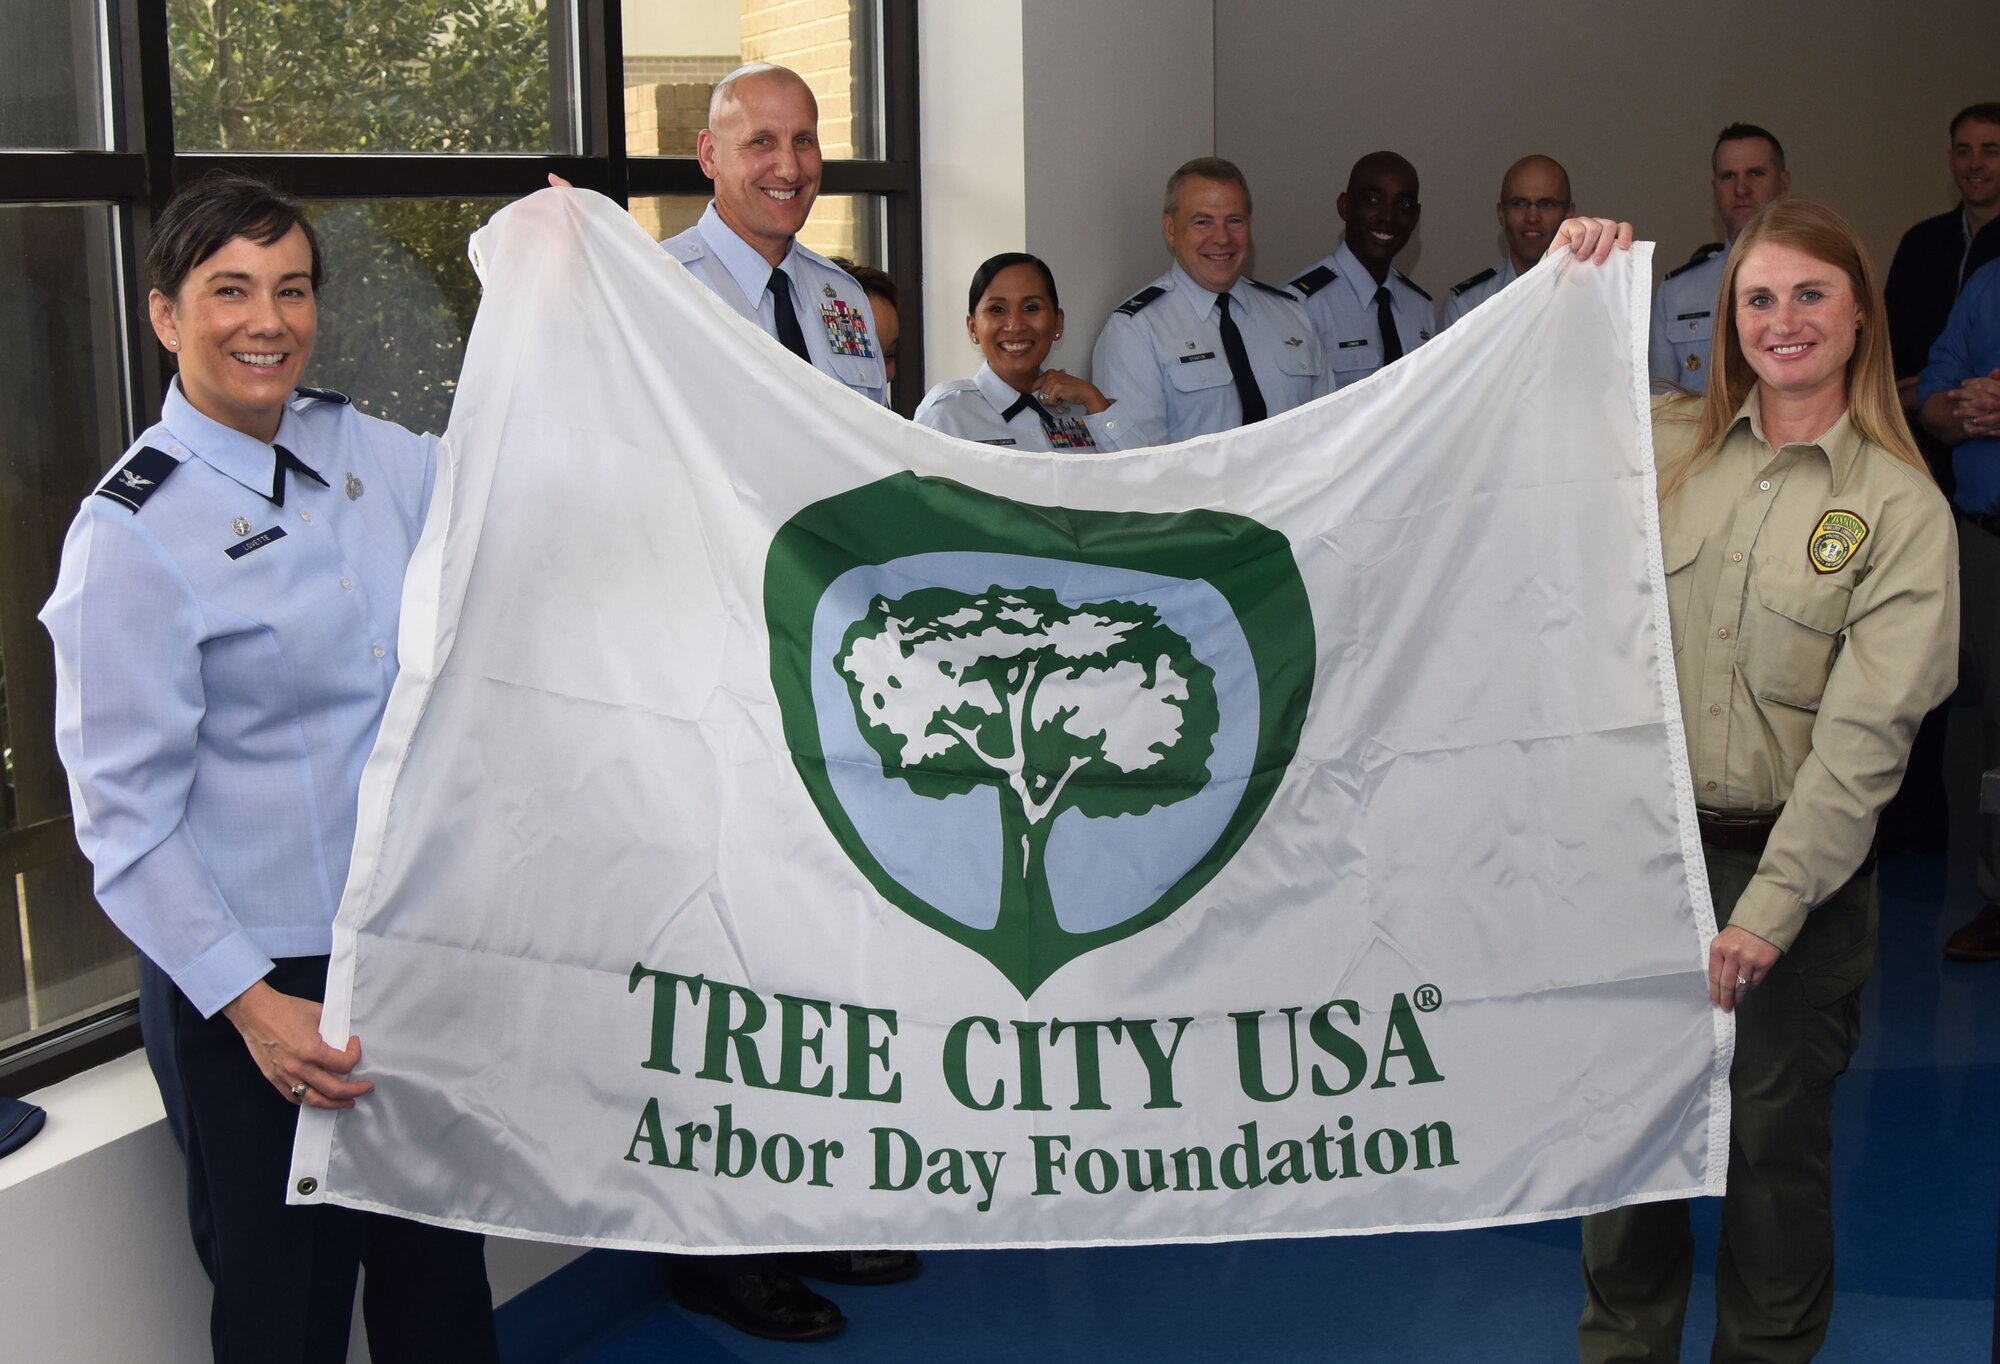 U.S. Air Force Col. Debra Lovette, 81st Training Wing commander, and Kelly Griffin, Harrison County Beautification Commission executive director, hold a Tree City USA flag during the Arbor Day Ceremony at the Keesler Child Development Center March 29, 2018, on Keesler Air Force Base, Mississippi. This is the 25th consecutive year Keesler has received the Tree City USA award. Arbor Day is a nationally celebrated observance that focuses on environmental issues and ways to improve the environment. (U.S. Air Force photo by Kemberly Groue)